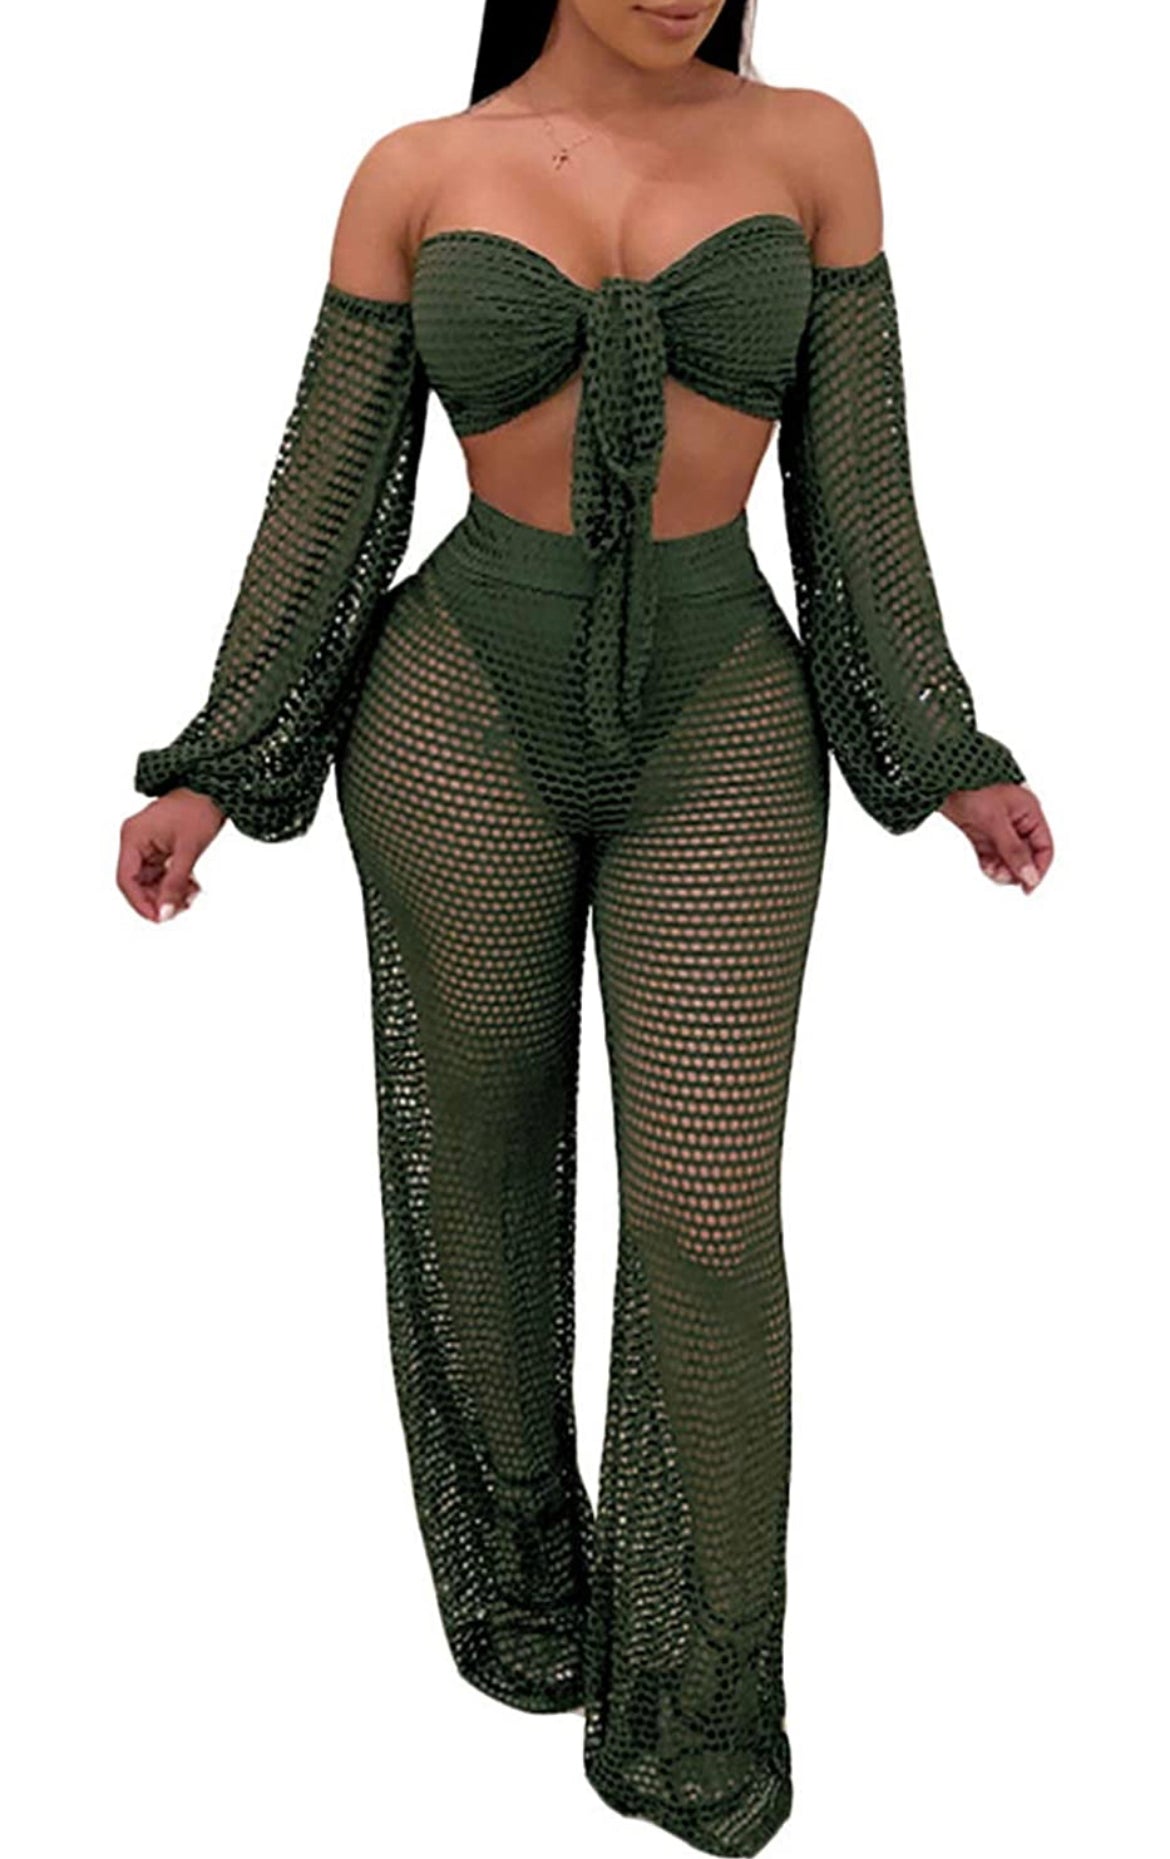  Sexy Mesh See Through Crochet Off Shoulder Crop Tops and Legging Pants 2 Piece Bikini Swimsuit Cover-ups Beach Outfits